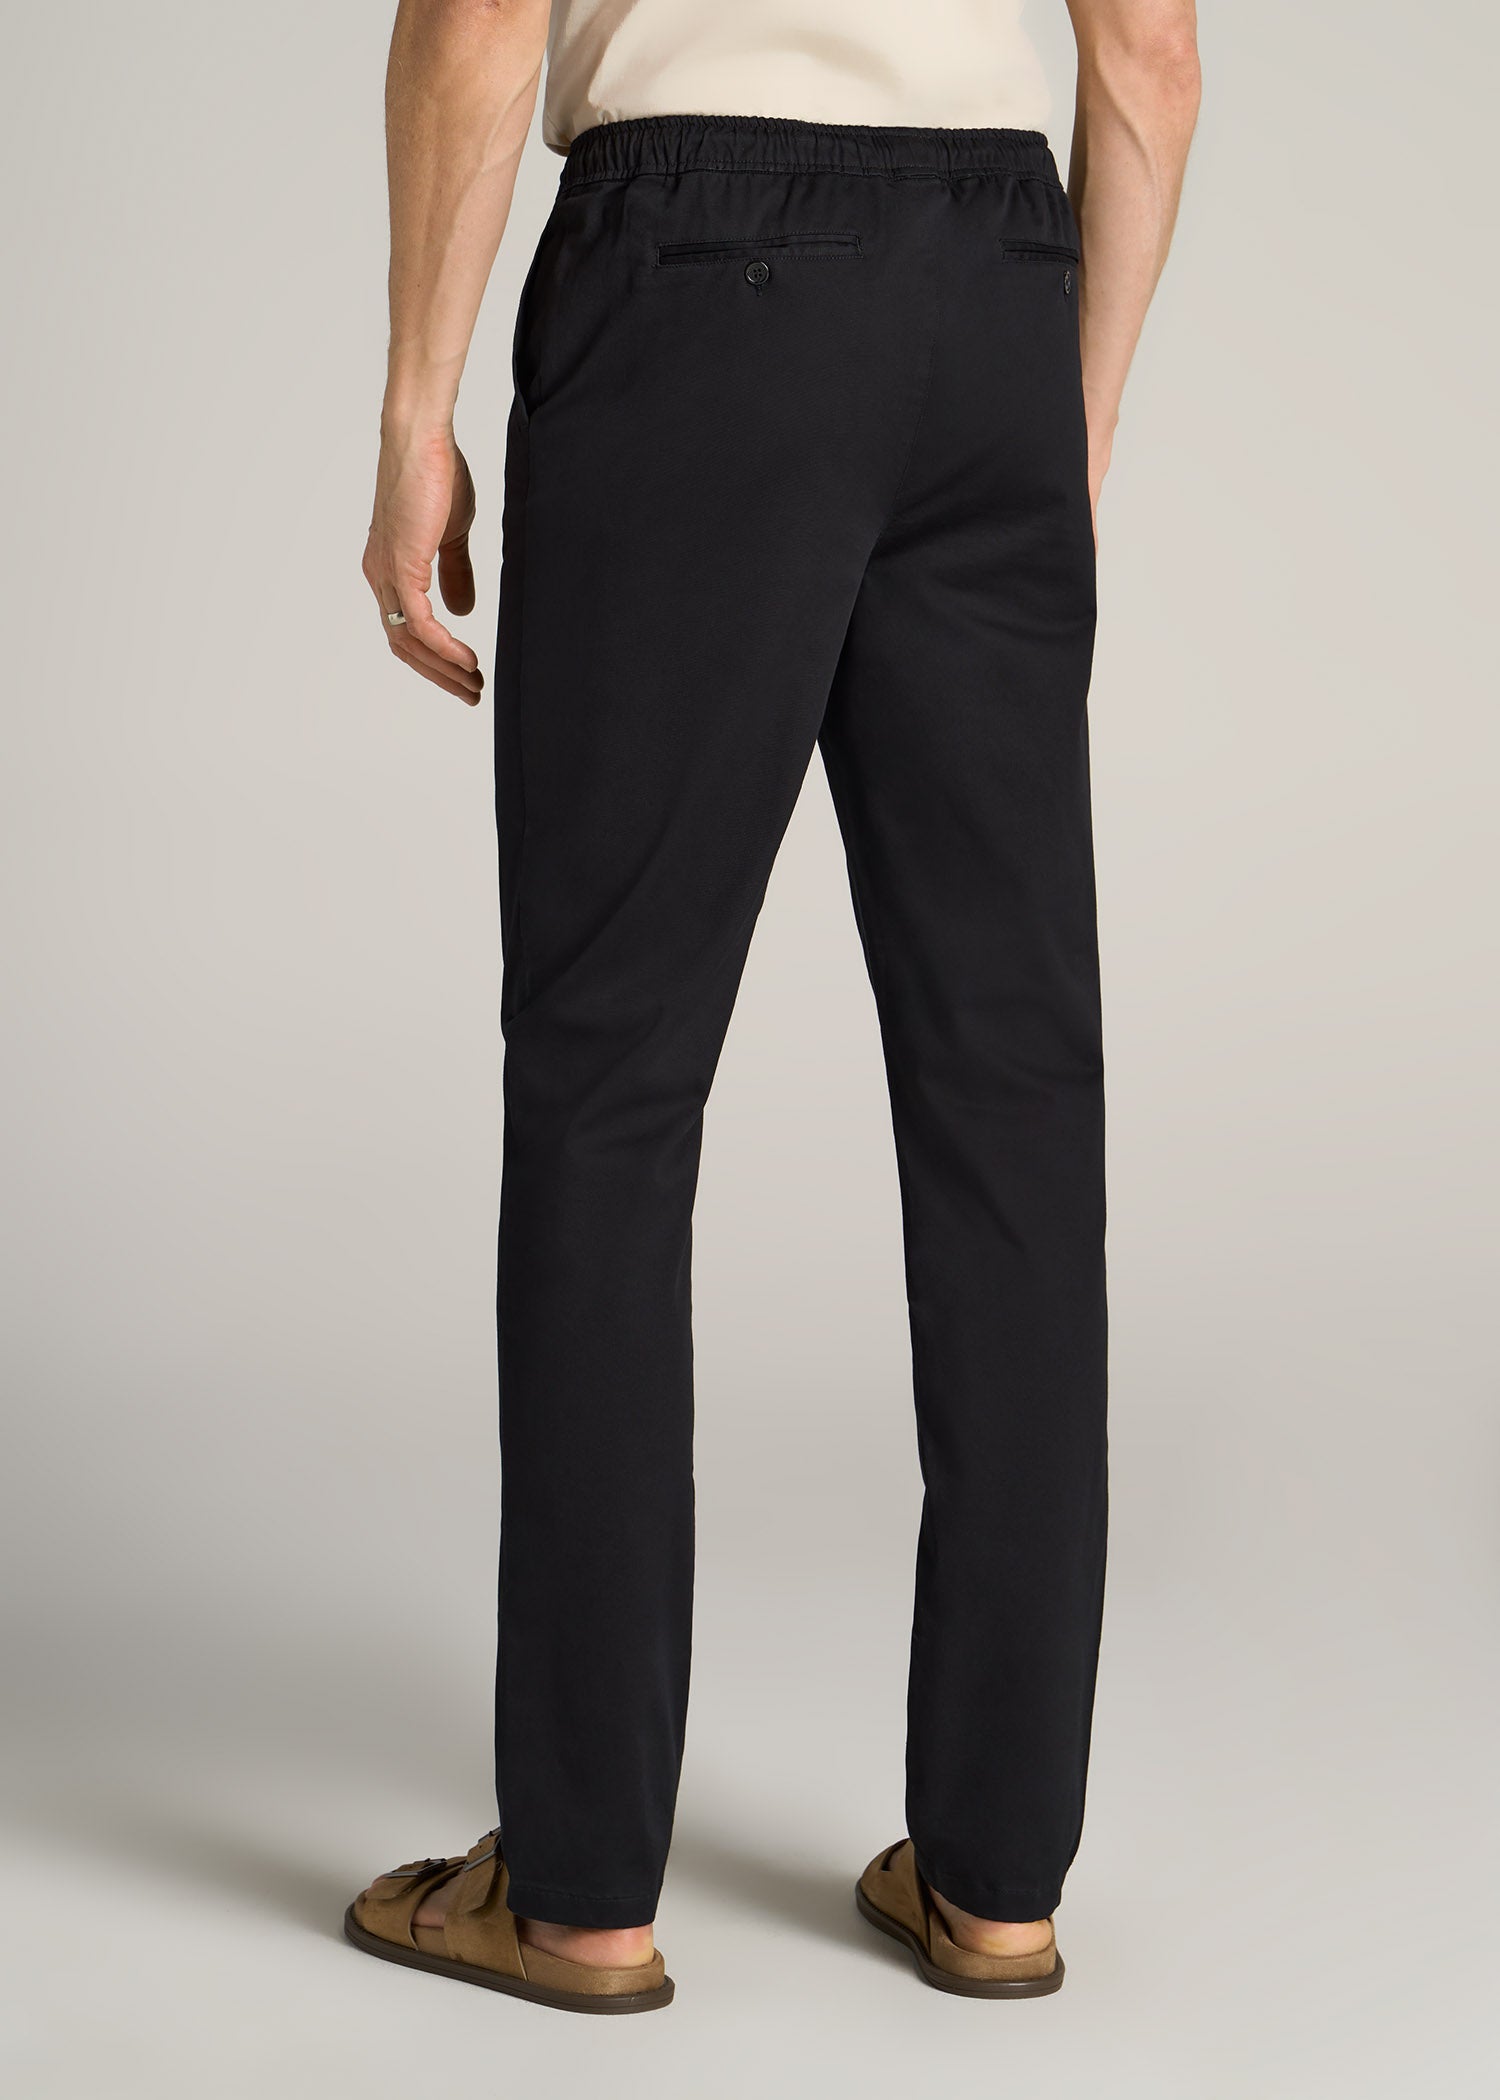 Stretch Pull On Deck Pants For Tall Men Black | American Tall